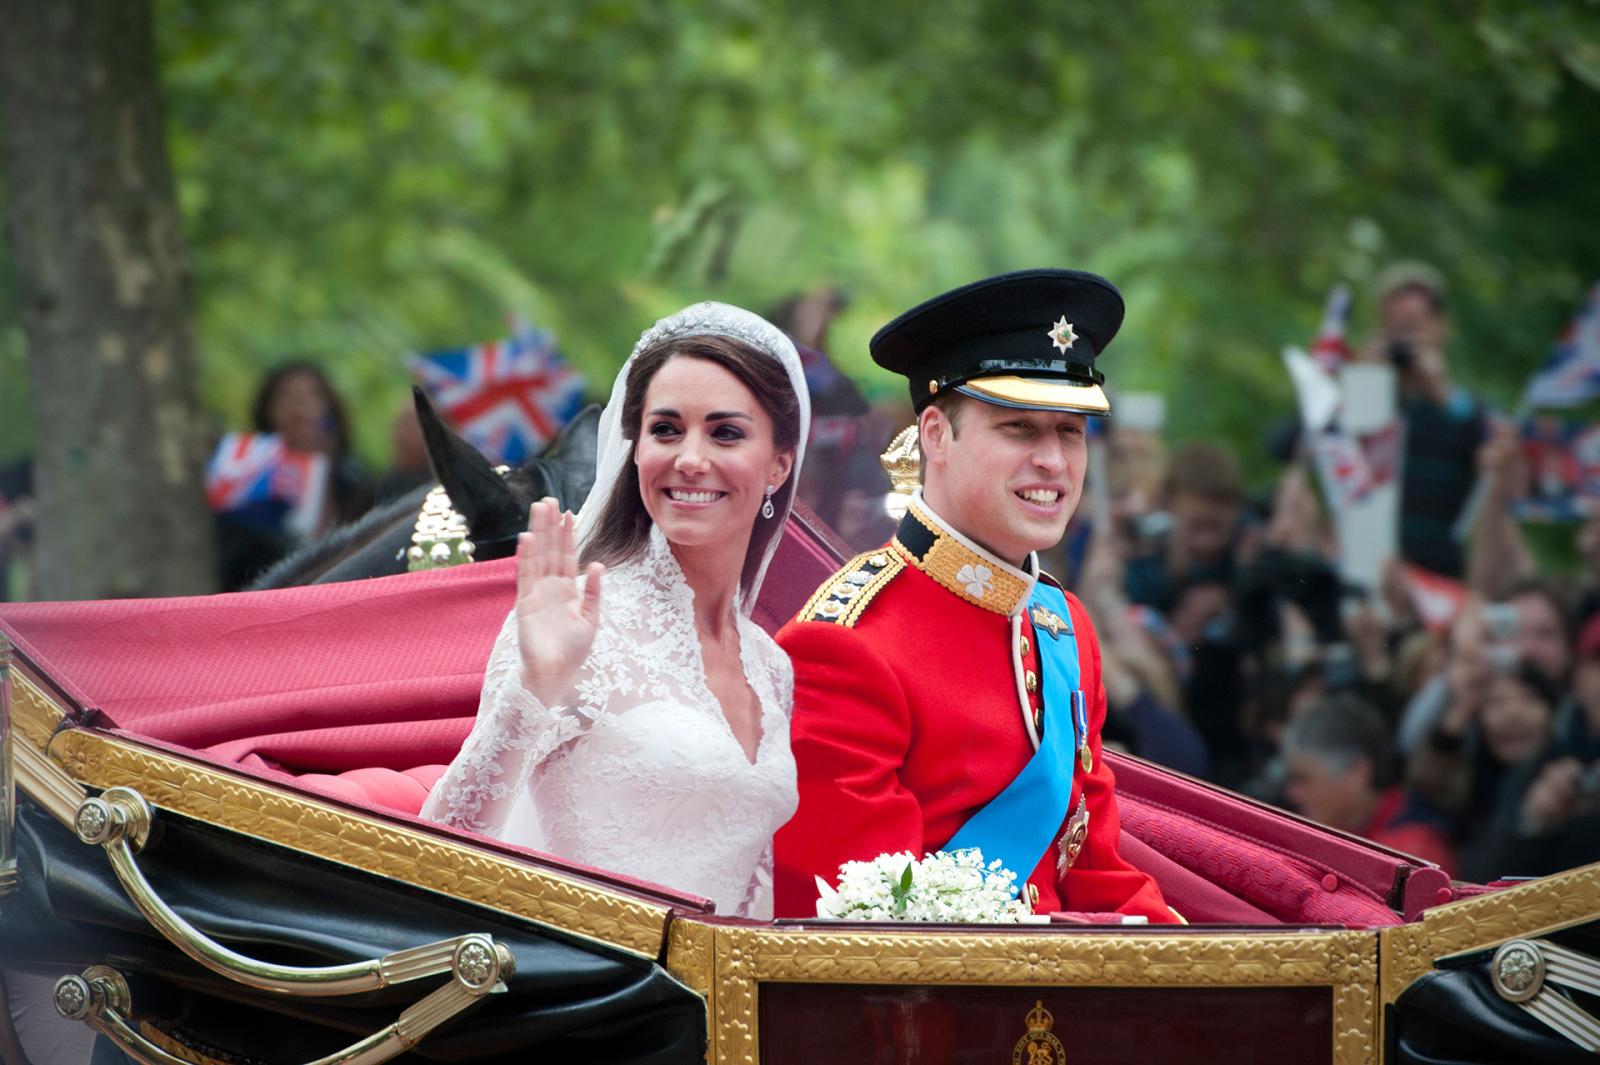 Prince William and Kate Middleton: a Royal Couple With a Rocky Past - image 6